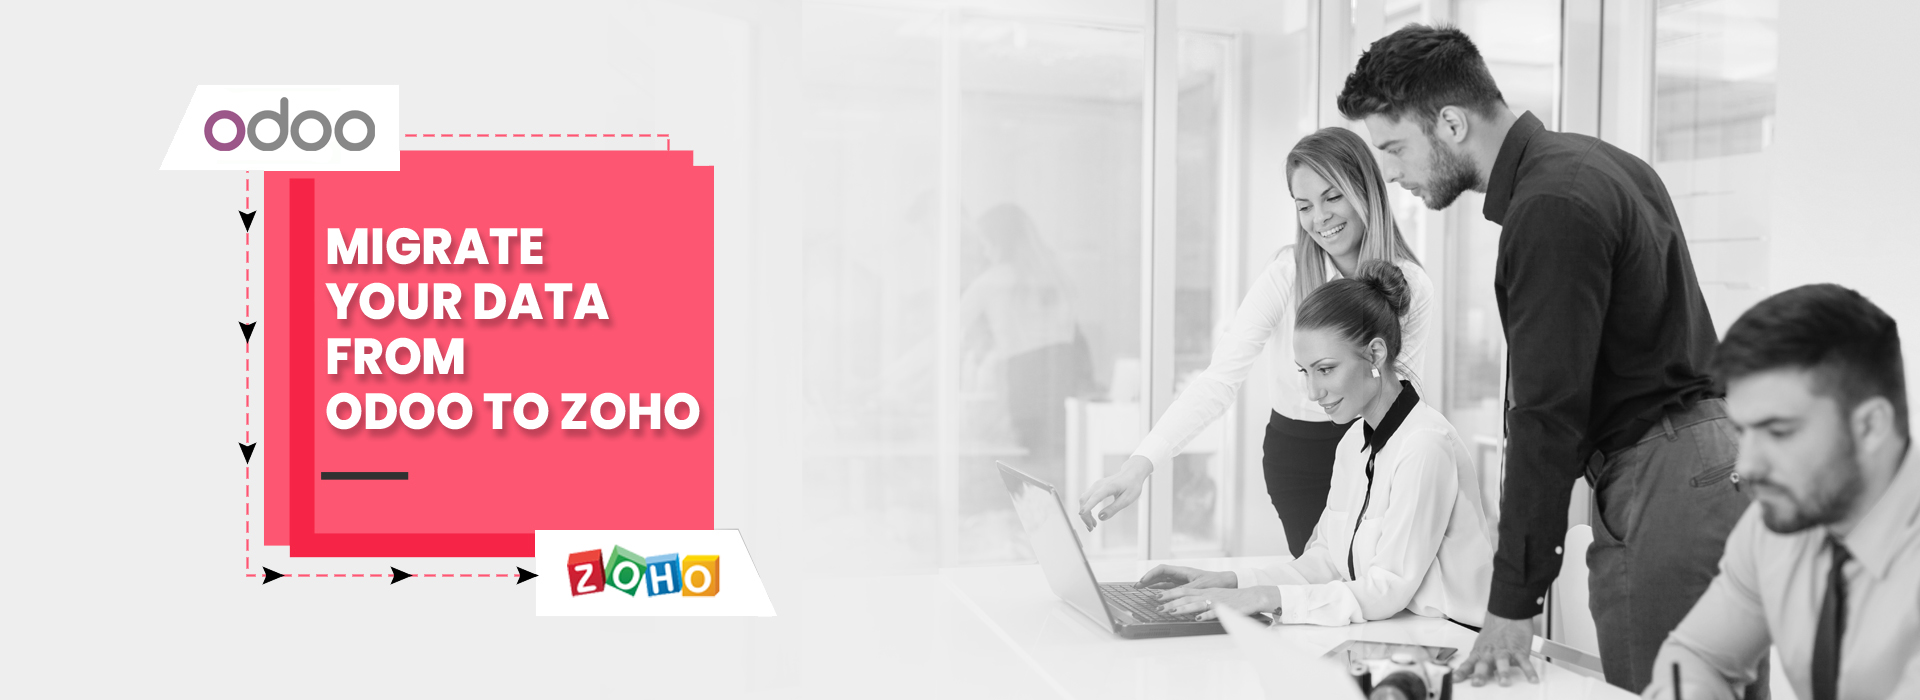 Migrate Your Data From Odoo To Zoho